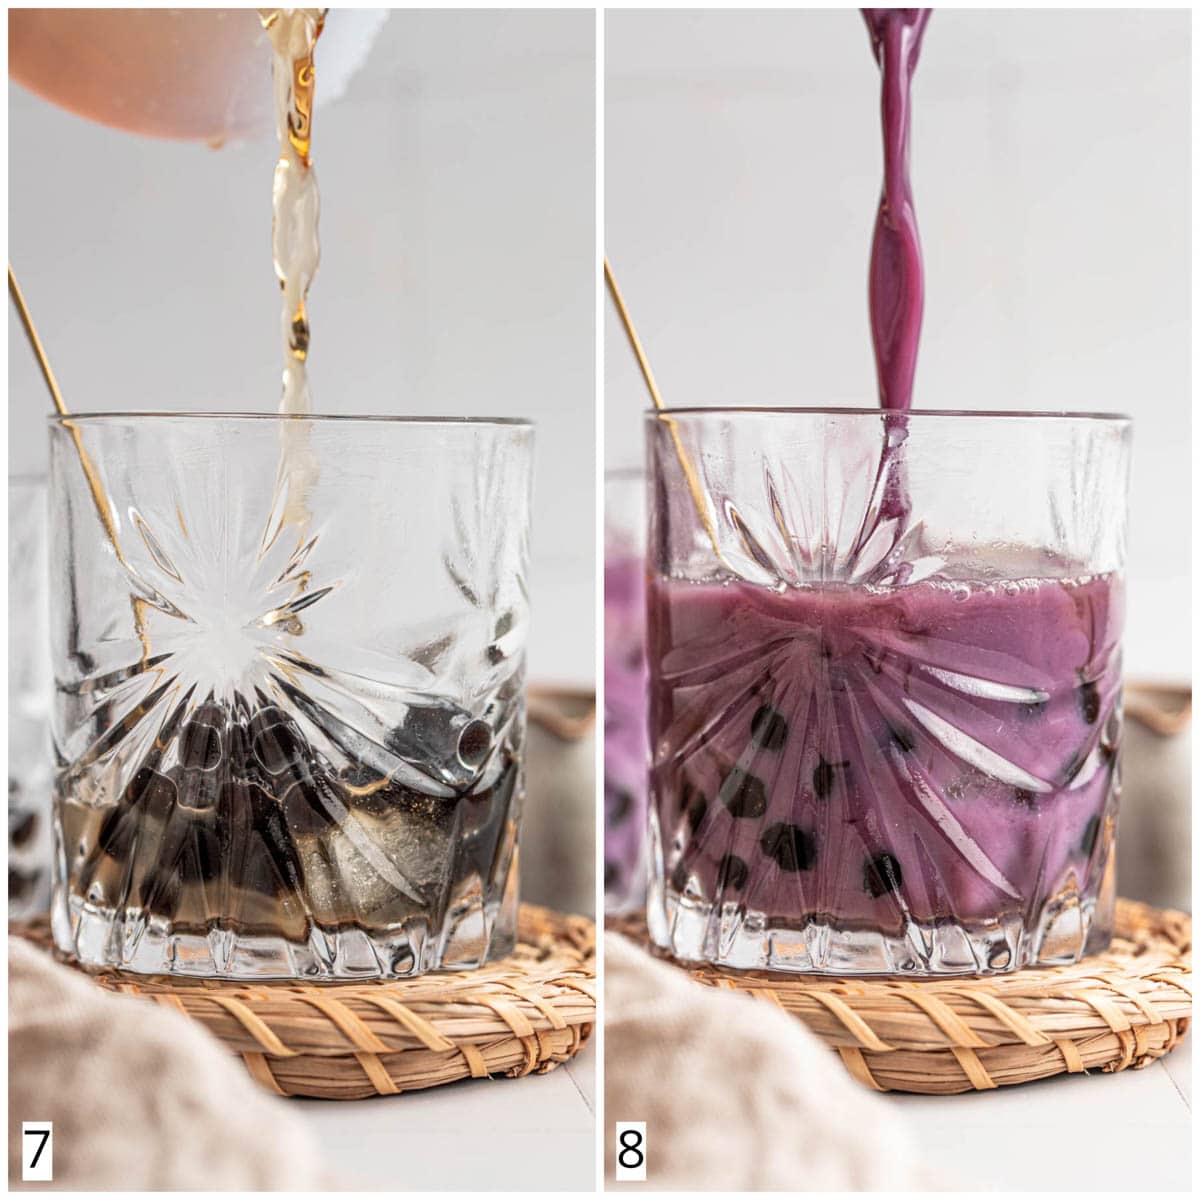 A collage of two images showing blueberry milk tea being poured into a glass.